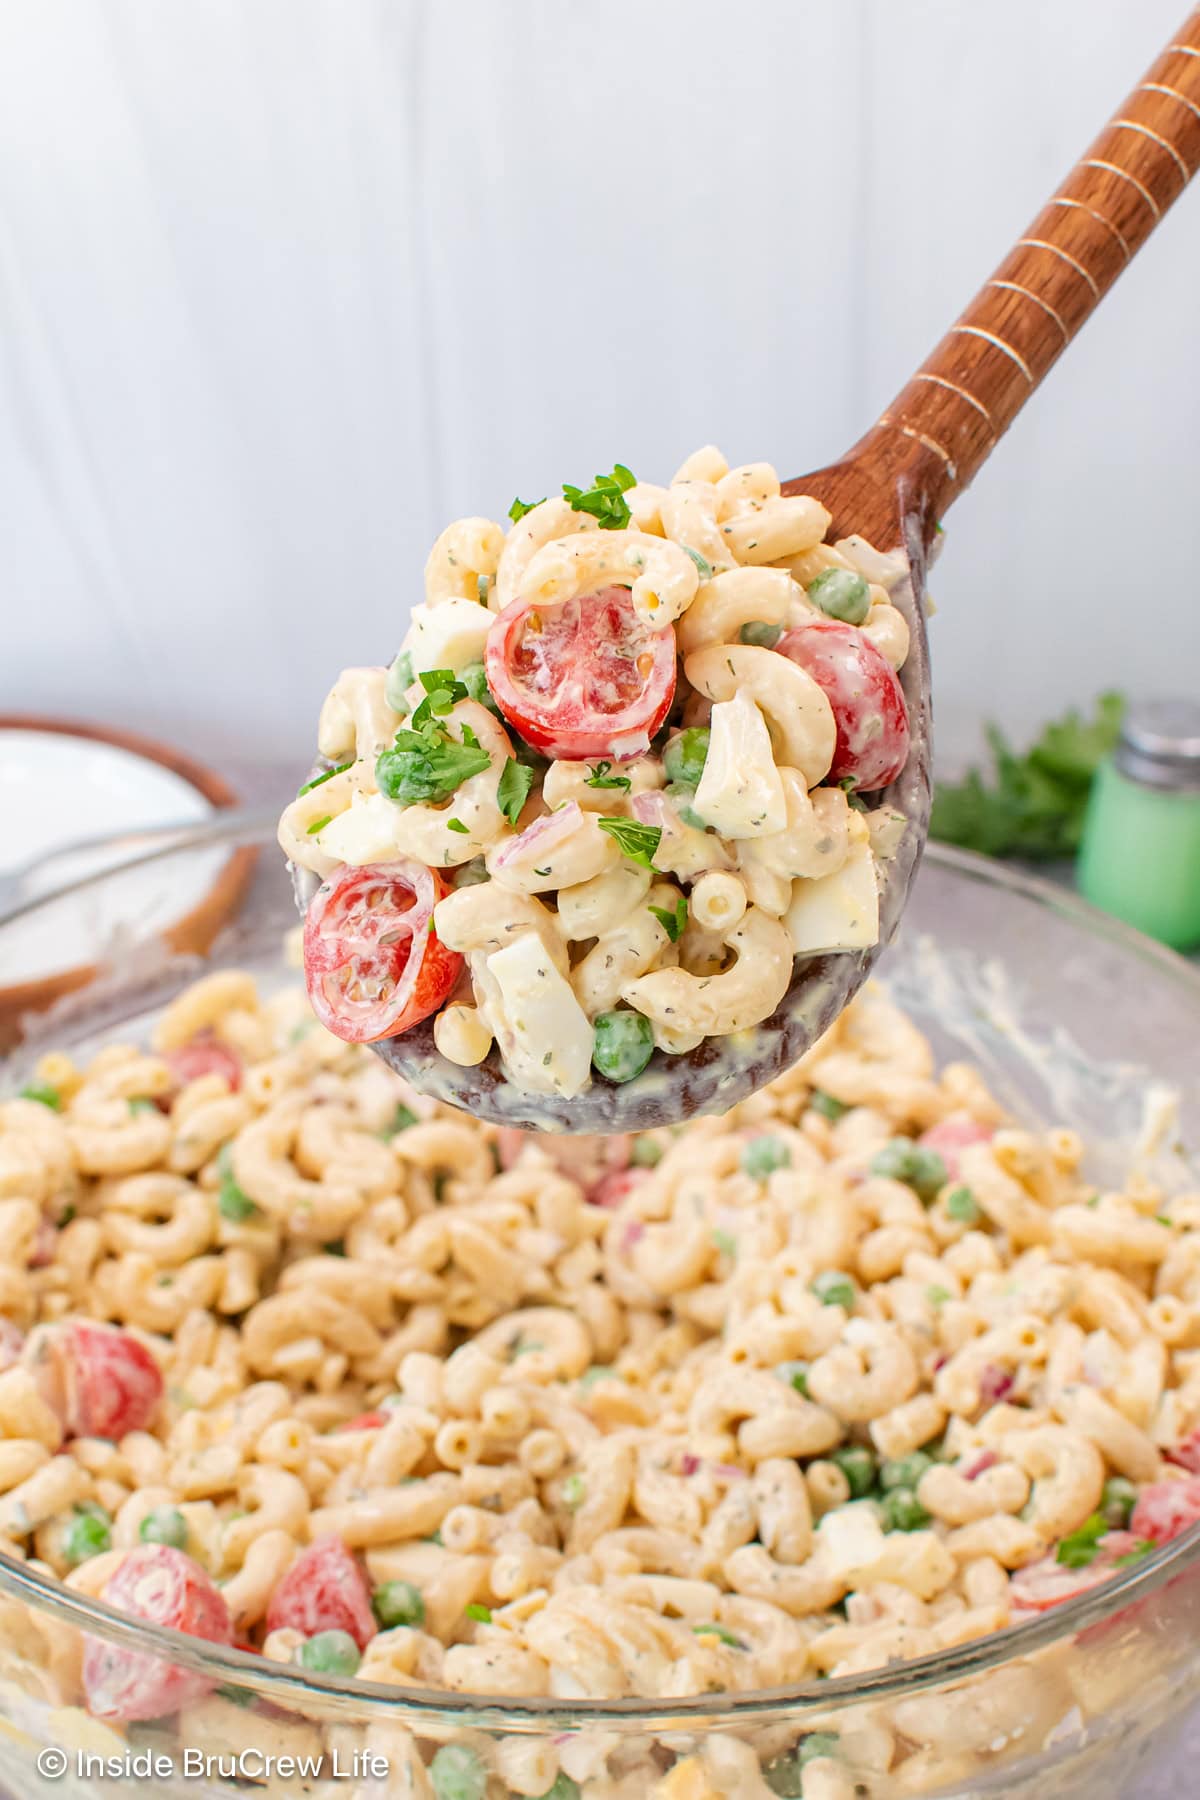 A scoop of pasta salad being lifted out of a bowl.